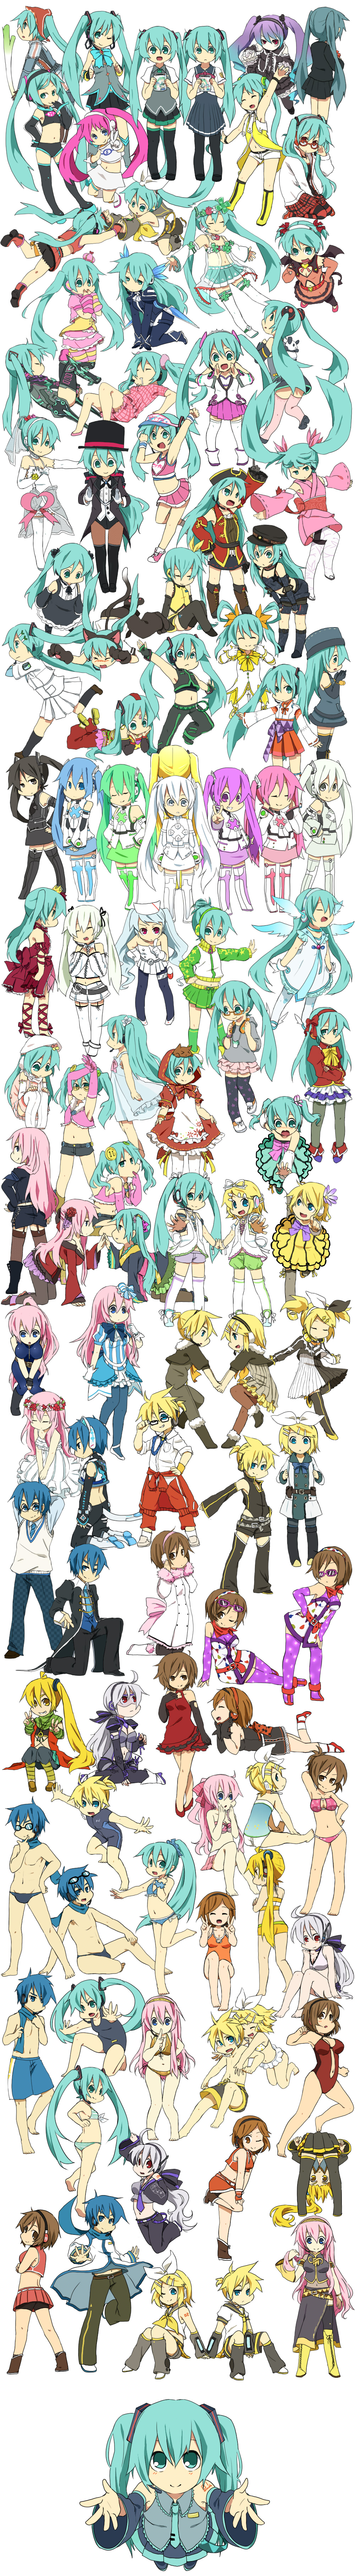 6+girls absurdres adjusting_eyewear aile_d'ange_(module) akita_neru alicia_melchiott alicia_melchiott_(cosplay) alternate_costume alternate_hair_color alternate_hairstyle angel_(module) animal_ears aqua_eyes aqua_hair arabian_(module) arabian_clothes arm_warmers armpits arms_behind_head arms_up asymmetry_(module) back-to-back bangs bat_wings belt bent_over beret bespectacled bike_shorts bikini black_eyes black_hair black_legwear black_one-piece_(module) blonde_hair blue_hair blue_legwear blush bodysuit boots bracelet breasts brown_legwear buttons campus_(module) cat_ears cat_tail cheer_(module) cheerleader china_(module) choker chou_(module) classic_(module) cleavage closed_eyes clothes_around_waist coat colorful_drop_(module) colorful_x_melody_(vocaloid) cosplay crown cute_(module) cyber_dive_(module) detached_sleeves dress earmuffs earrings elbow_gloves eoe_style_(module) ethnic_(module) everyone fairy_(module) fetal_position fishnet_pantyhose fishnets flower fraulein_(module) frills fuwafuwa_coat_(module) galaxy_(module) gallia_gun_dai_7_shoutai_(module) garter_belt gathers glasses gloves gothic_(module) gothic_lolita green_eyes green_hair green_legwear grimm's_fairy_tales hair_flower hair_ornament hairclip hajimete_no_koi_ga_owaru_toki_(vocaloid) hana_(module) hard_rock_(module) harem_pants hat hatsune_miku hatsune_miku_no_gekishou_(vocaloid) head_wings head_wreath headphones headset heart high_heels highres infinity_(module) jacket jacket_around_waist japanese_clothes jersey_(module) jewelry just_be_friends_(vocaloid) kagamine_len kagamine_rin kagamine_rin_(cosplay) kaito kimono kocchi_muite_baby_(vocaloid) leg_warmers leggings little_red_riding_hood little_red_riding_hood_(grimm) little_red_riding_hood_(grimm)_(cosplay) lolita_fashion long_hair long_image looking_back looking_up magician_(module) magnet_(vocaloid) male_swimwear medium_breasts megurine_luka meiko meiko_(cosplay) midriff miko_(module) mikuzukin_(module) miracle_paint_(vocaloid) miyabi_(module) modern_girl_(module) multicolored multicolored_clothes multicolored_legwear multiple_boys multiple_girls multiple_persona natural_(module) navel necktie neko_cyber_(module) nemu_nemu_(module) noble_(module) nurse_cap nyan_ko_(module) obi one-piece_swimsuit open_mouth osanpo_style_(module) p-style_(module) pajamas panda pants pantyhose paw_gloves paws piapro pink_hair pink_legwear pink_pops_(module) pirate pirate_(module) plaid plug-in_(module) polka_dot ponytail pose powder_(module) princess_(module) print_legwear project_diva project_diva_(series) project_diva_2nd punk_(module) punkish_(module) purple_eyes purple_legwear red_eyes reki_(arequa) retro roshin_yuukai_(vocaloid) running saihate_(vocaloid) sailor_collar sakine_meiko saliva sash scarf scarlet_(module) school_(module) school_jersey_(module) school_swimsuit school_uniform see-through senjou_no_valkyria senjou_no_valkyria_1 shoes short_kimono short_shorts short_yukata shorts side_ponytail side_slit sitting skirt sleeping small_breasts smile snow_(module) socks songover space_channel_39_(module) space_channel_5 spacey_nurse_(module) spiritual_(module) spring_onion star star_(module) star_print striped striped_bikini striped_legwear striped_swimsuit sunglasses sweater_vest swim_briefs swim_trunks swimsuit swimwear swimwear_(module) swimwear_b_(module) swimwear_p_(module) swimwear_s_(module) swimwear_t_(module) swimwear_v_(module) swimwear_vs_(module) swimwear_ws_(module) swimwear_wv_(module) tail tall_image thighhighs top_hat tripping tuxedo twintails ulala ulala_(cosplay) uneven_twintails v veil vertical_stripes vest vf_suit_(module) vintage_dress_(module) visor_cap vn02_(module) vocal_(module) vocaloid voyakiloid wetsuit white_eyes white_hair white_legwear white_one-piece_(module) winged_shoes wings wristband yellow_(vocaloid) younger yowane_haku yukata